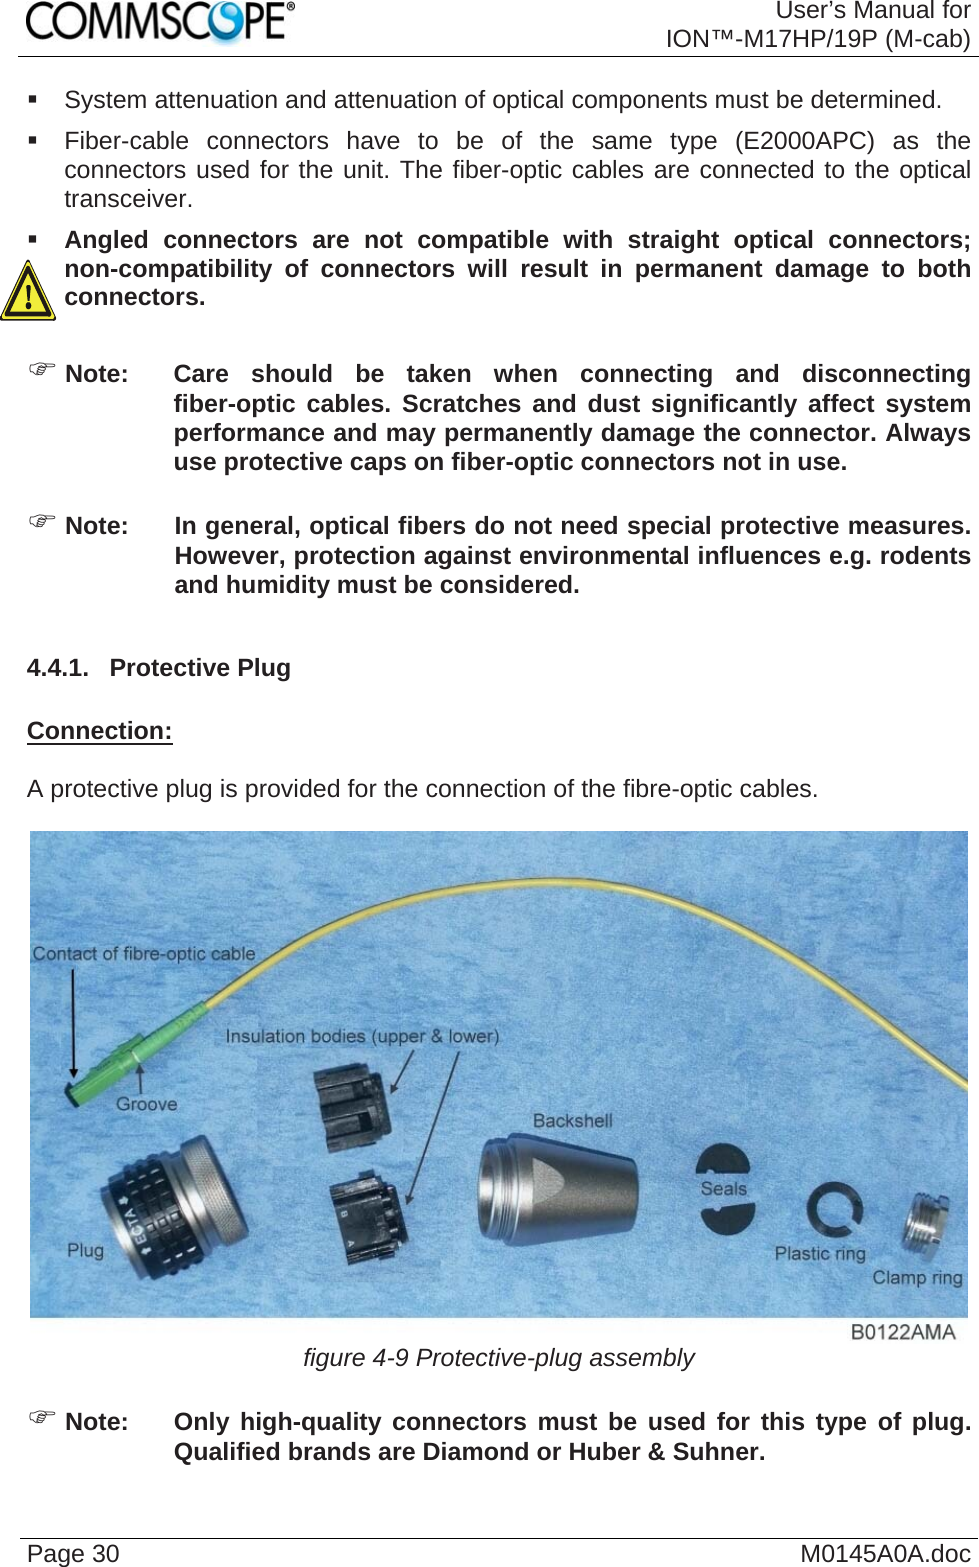  User’s Manual forION™-M17HP/19P (M-cab) Page 30  M0145A0A.doc  System attenuation and attenuation of optical components must be determined.    Fiber-cable connectors have to be of the same type (E2000APC) as the connectors used for the unit. The fiber-optic cables are connected to the optical transceiver.  Angled connectors are not compatible with straight optical connectors; non-compatibility of connectors will result in permanent damage to both connectors.  ) Note:  Care should be taken when connecting and disconnecting fiber-optic cables. Scratches and dust significantly affect system performance and may permanently damage the connector. Always use protective caps on fiber-optic connectors not in use.  ) Note:  In general, optical fibers do not need special protective measures. However, protection against environmental influences e.g. rodents and humidity must be considered.  4.4.1.  Protective Plug  Connection:  A protective plug is provided for the connection of the fibre-optic cables.   figure 4-9 Protective-plug assembly  ) Note:  Only high-quality connectors must be used for this type of plug. Qualified brands are Diamond or Huber &amp; Suhner.  